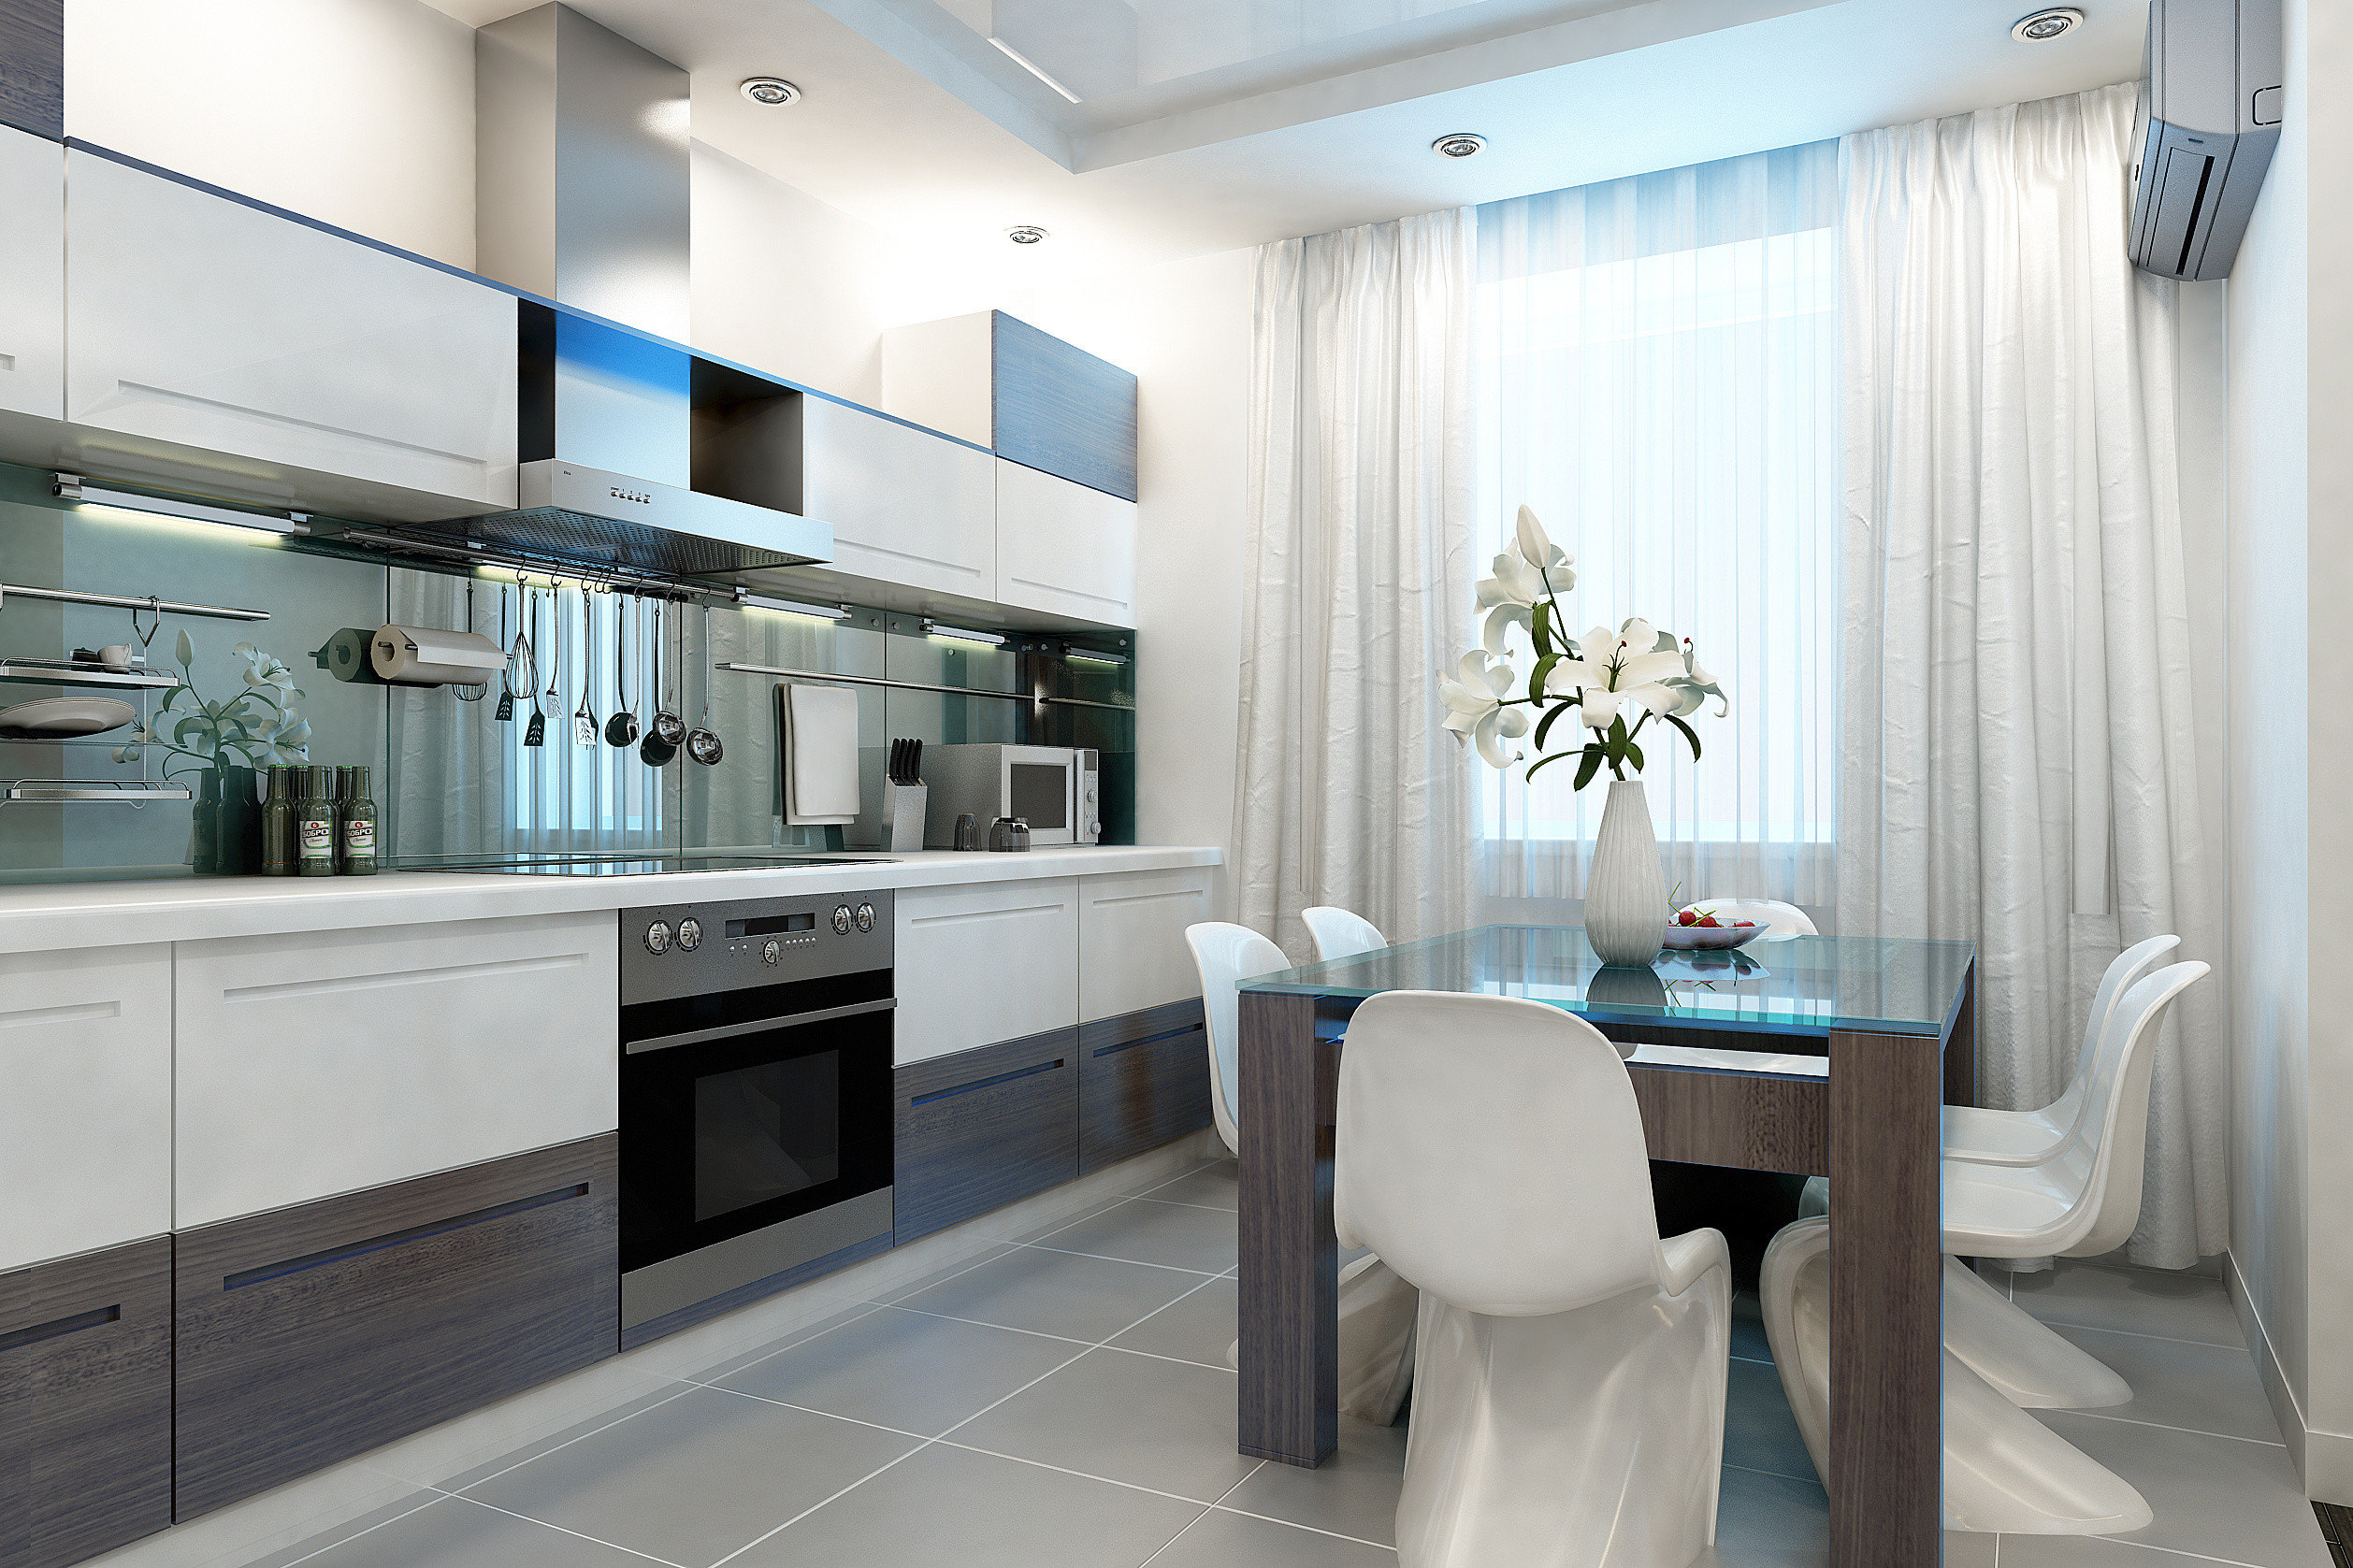 Kitchen Valance Modern
 Choose Modern Kitchen Curtains And Show Your Style